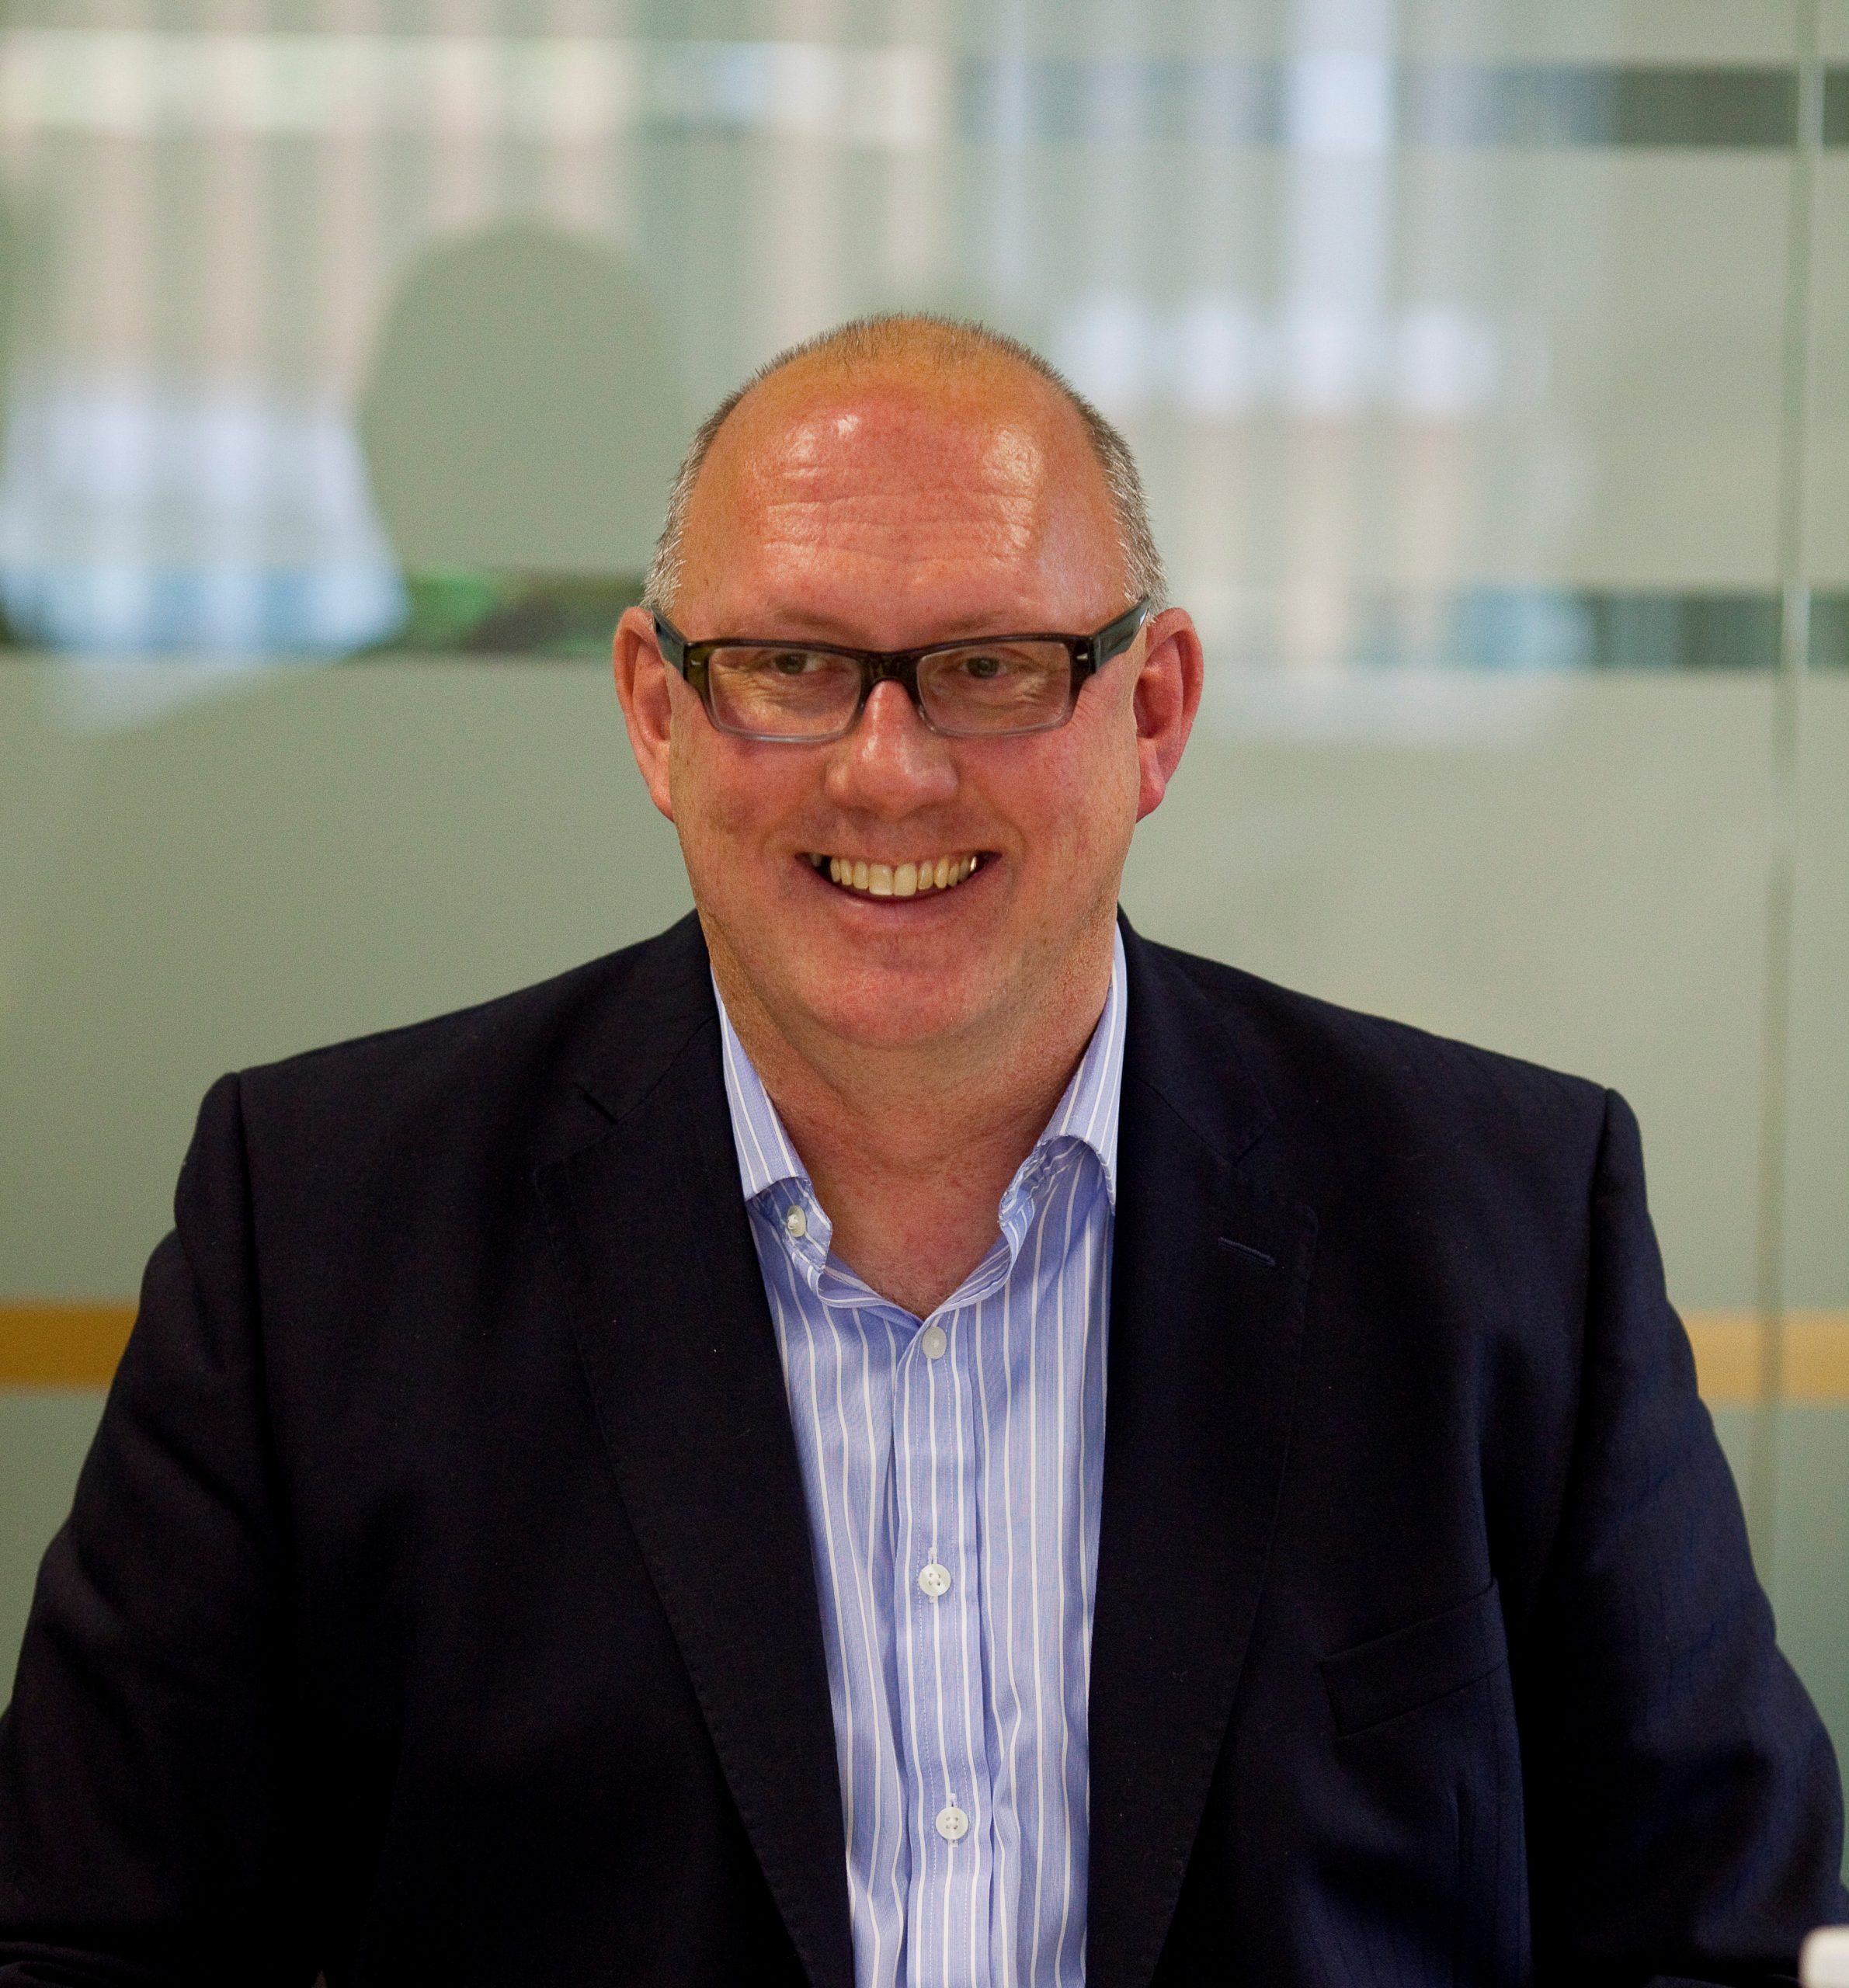 As the UK's trade association for the fresh produce industry, the FPC is working on a variety of issues affecting the sector, as its CEO Nigel Jenney also explains in this interview with Eurofresh Distribution.